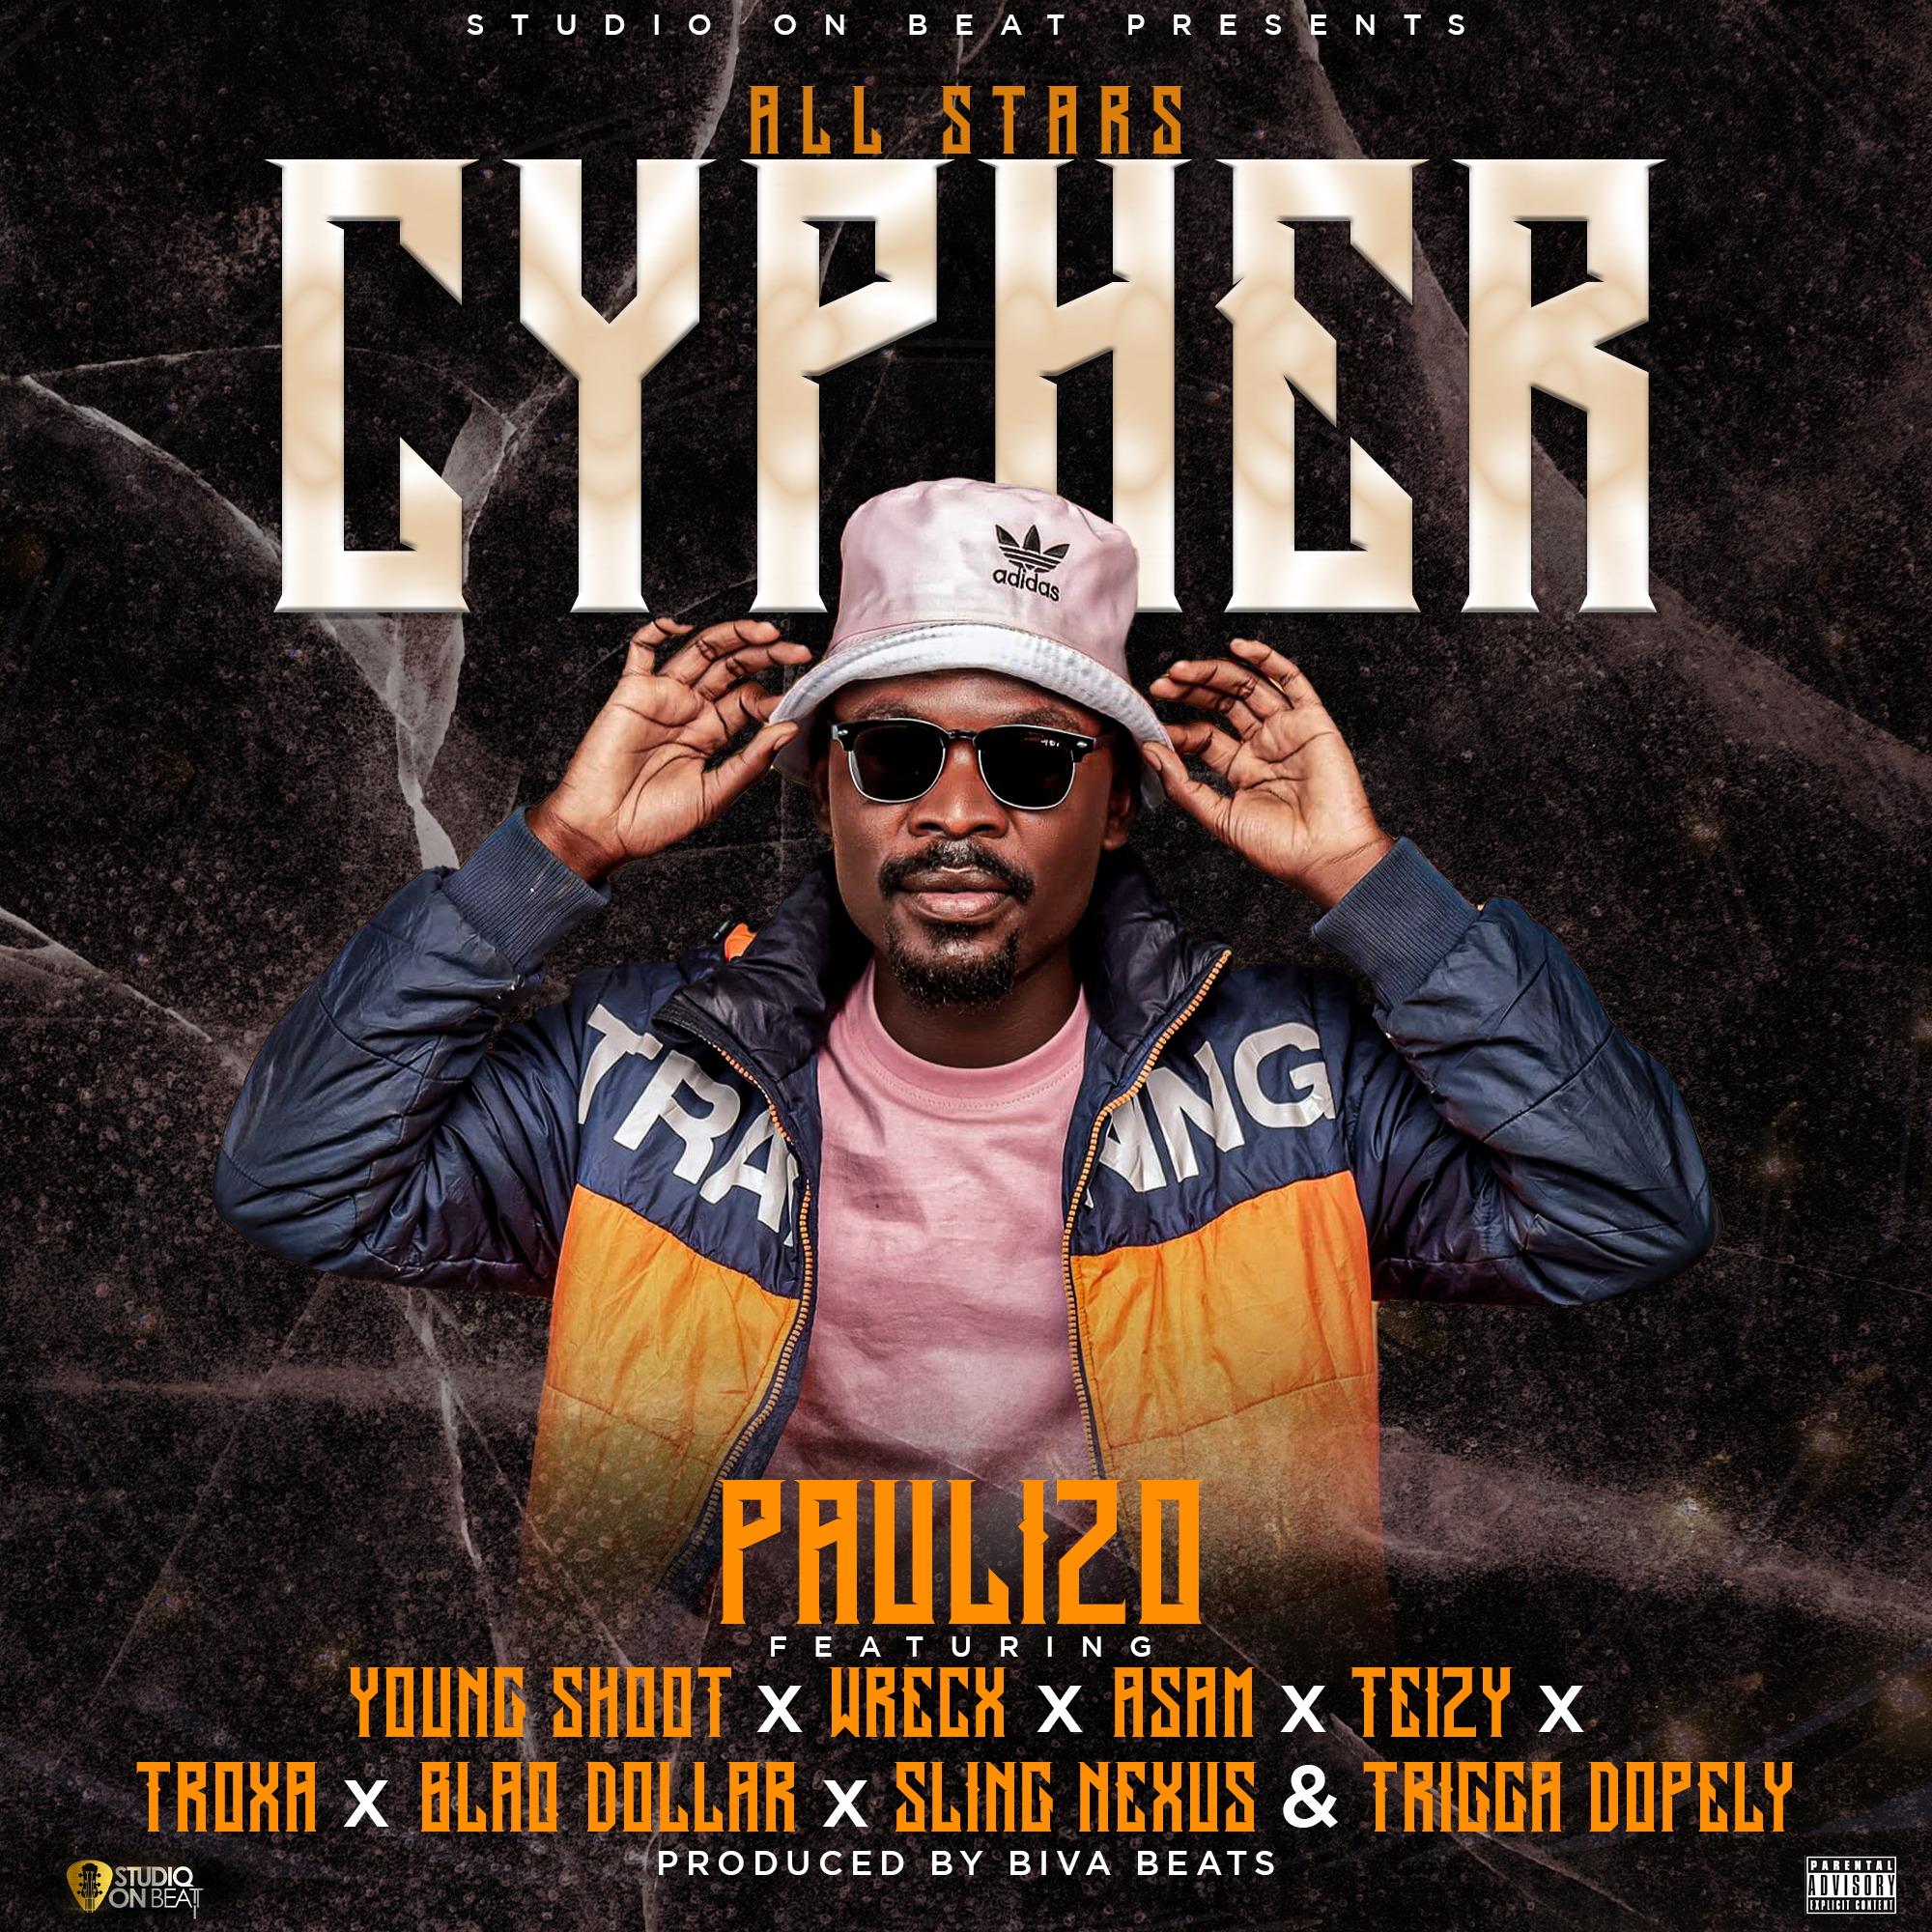 Paulizo FT. Various Artists - All Stars Cypher Mp3 Download